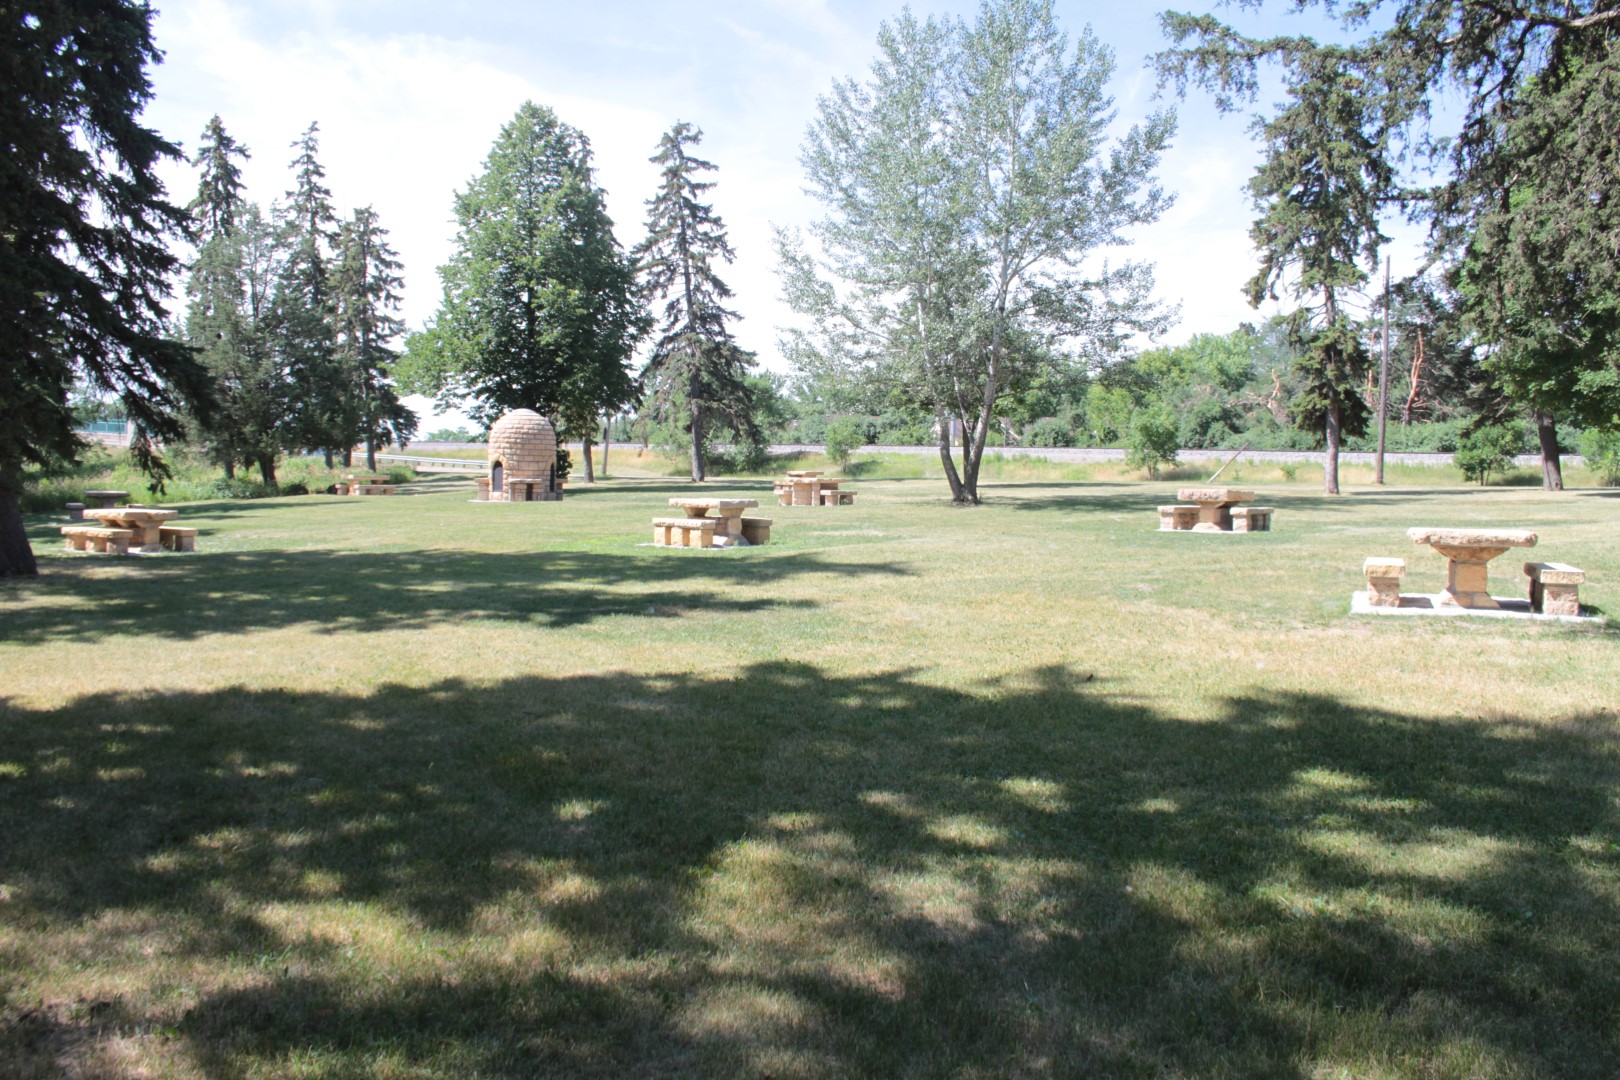 grass picnic area with six spaced out stone picnic tables, trees at edges and the “beehive” oven near the back of the view 